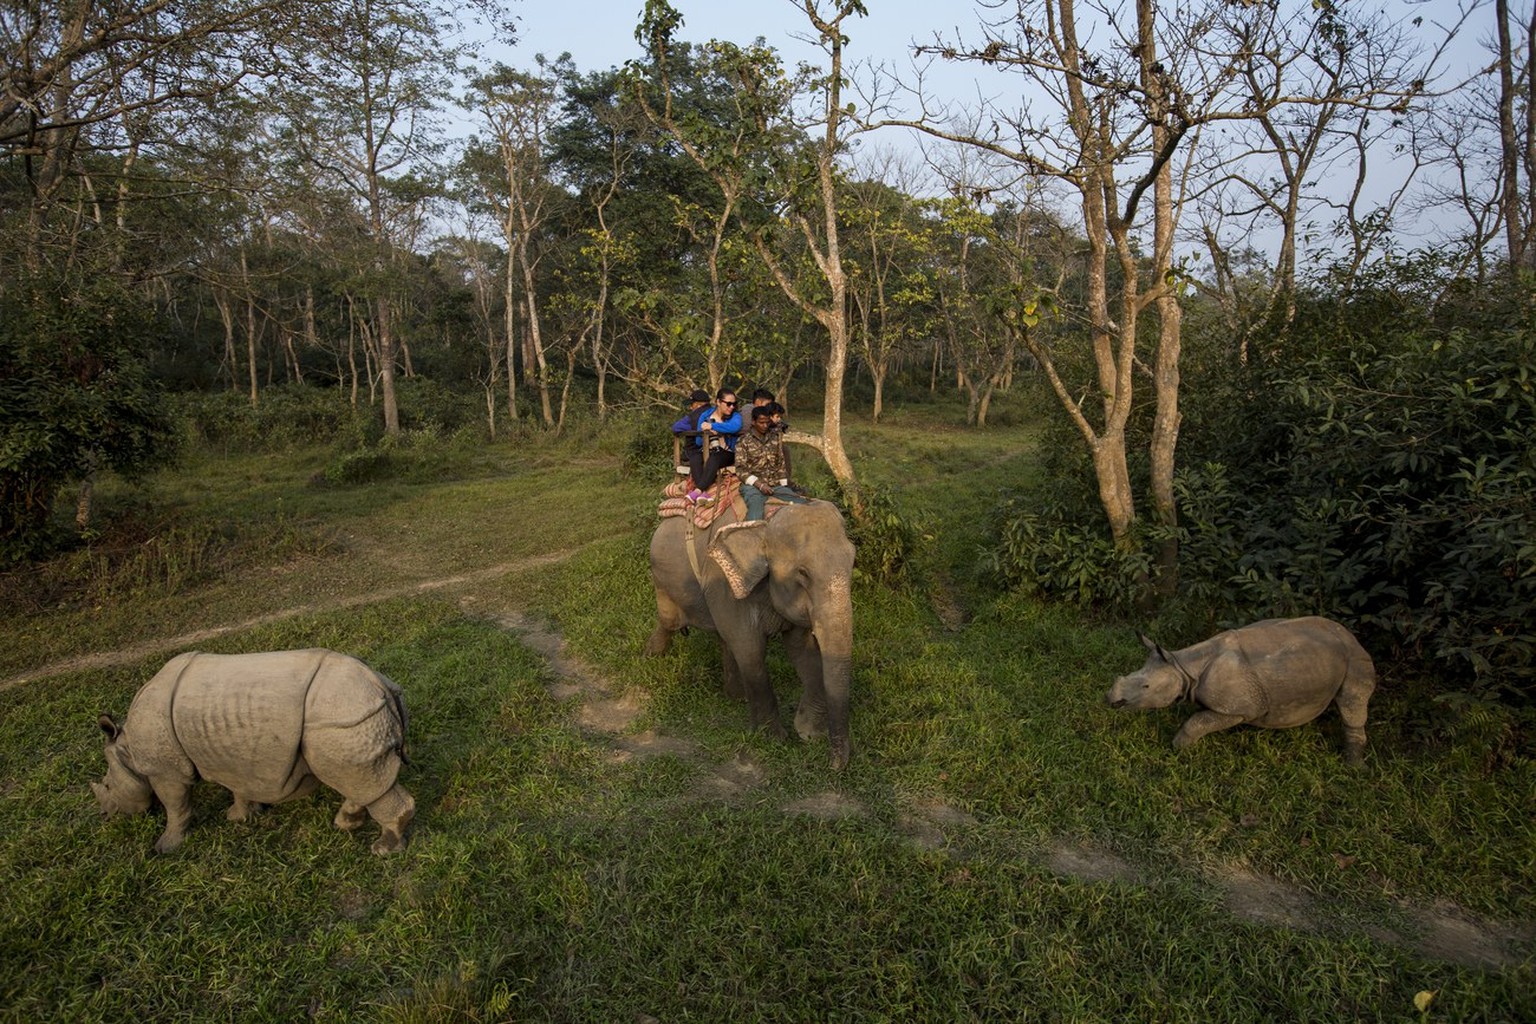 epa06405382 Tourists look at one-horned rhinos during an elephant ride as they visit Chitwan National Park, in Chitwan district, Nepal, 25 December 2017. EPA/NARENDRA SHRESTHA